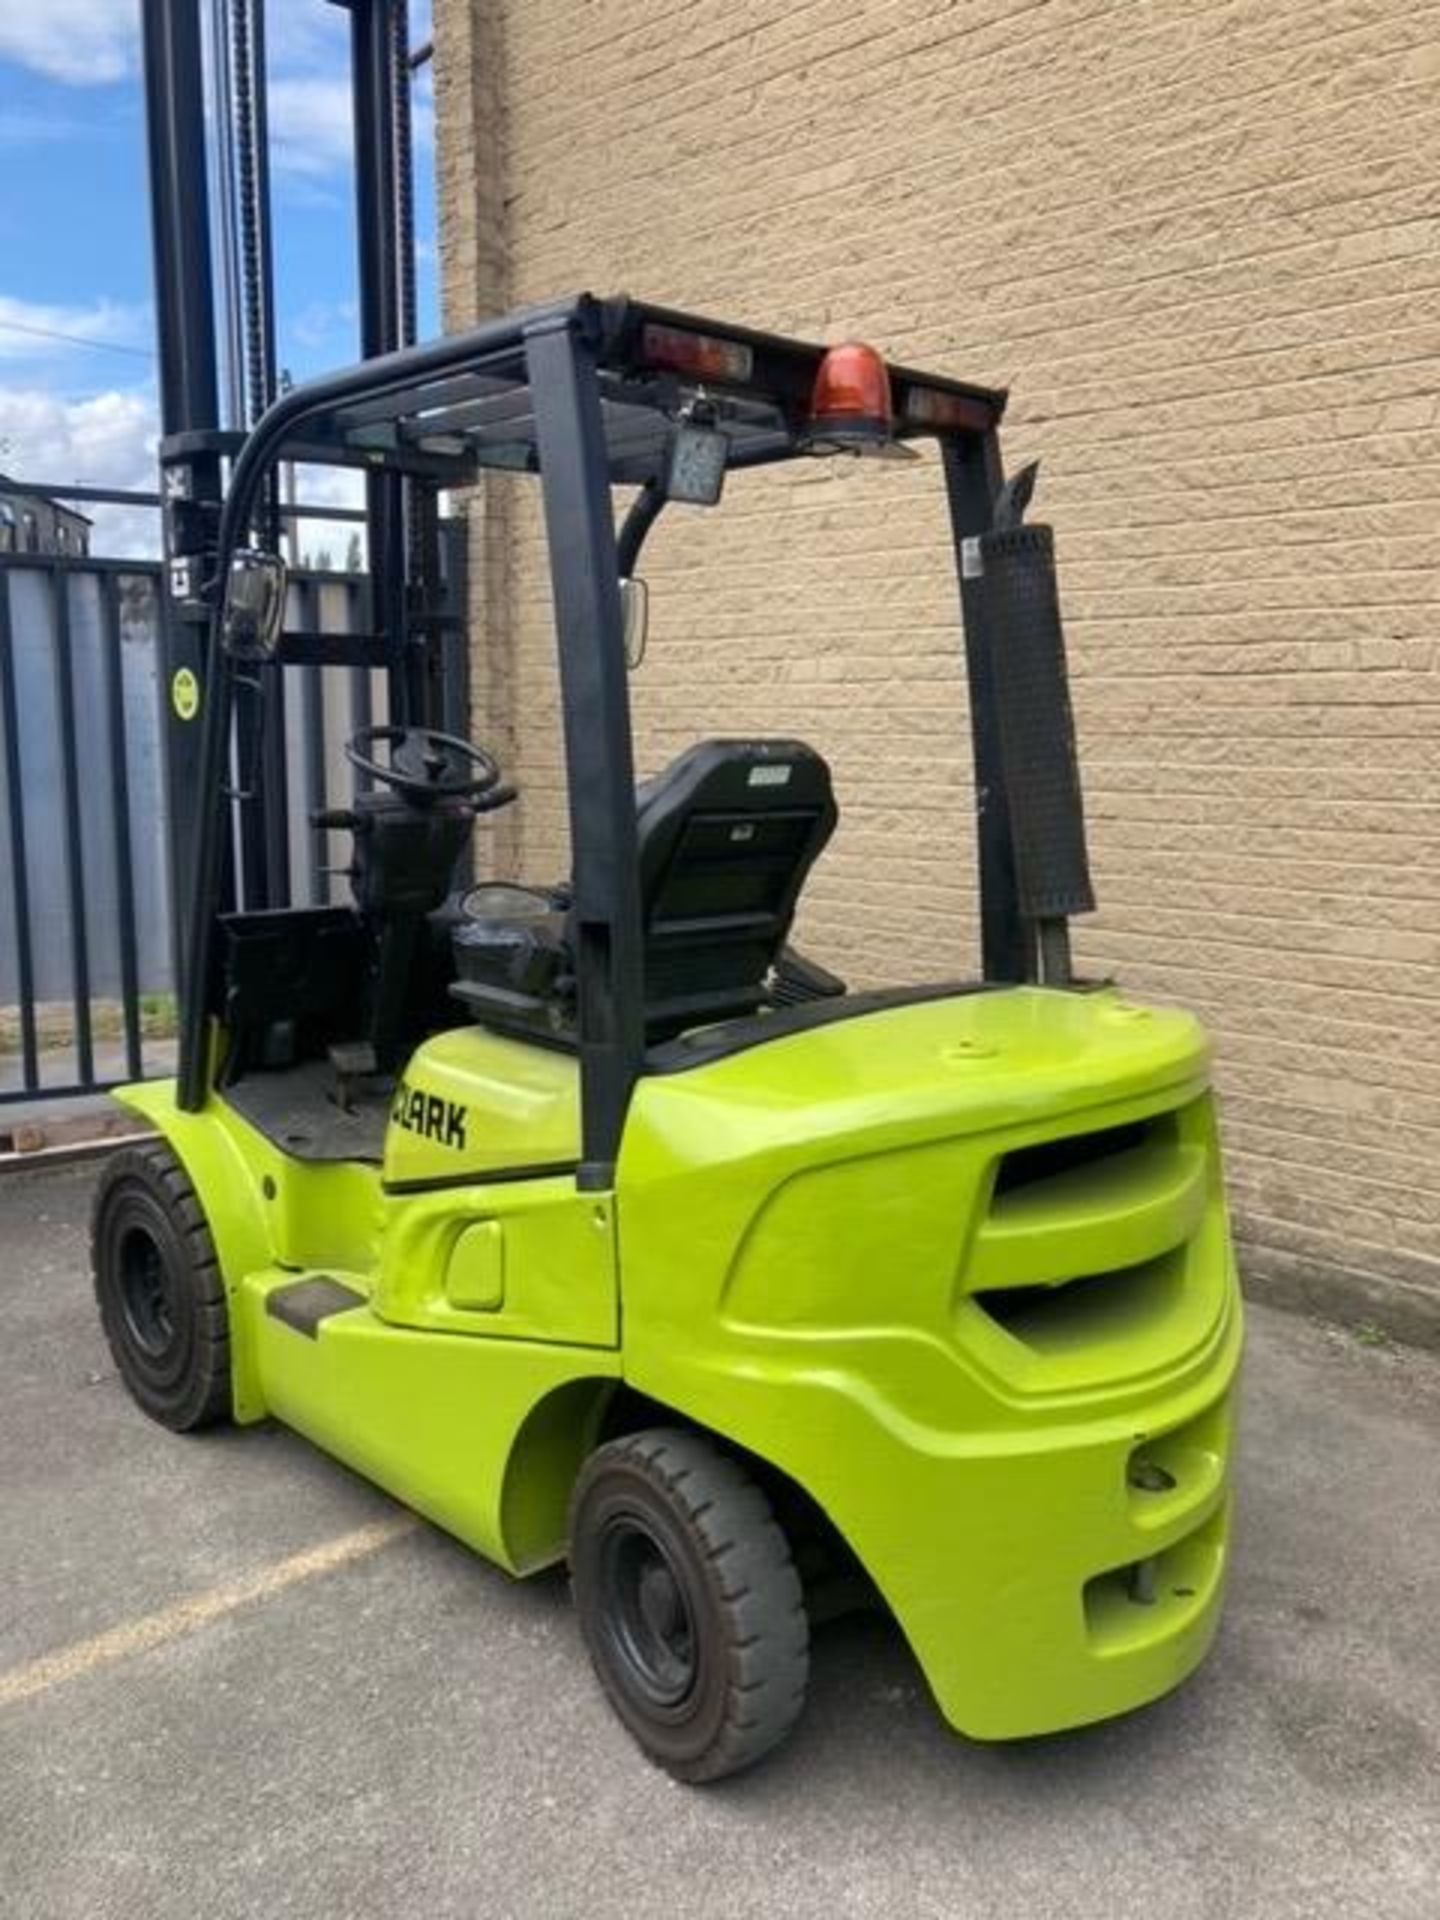 Clark GTS325D diesel Forklift Truck, year 2018, 25 - Image 5 of 23